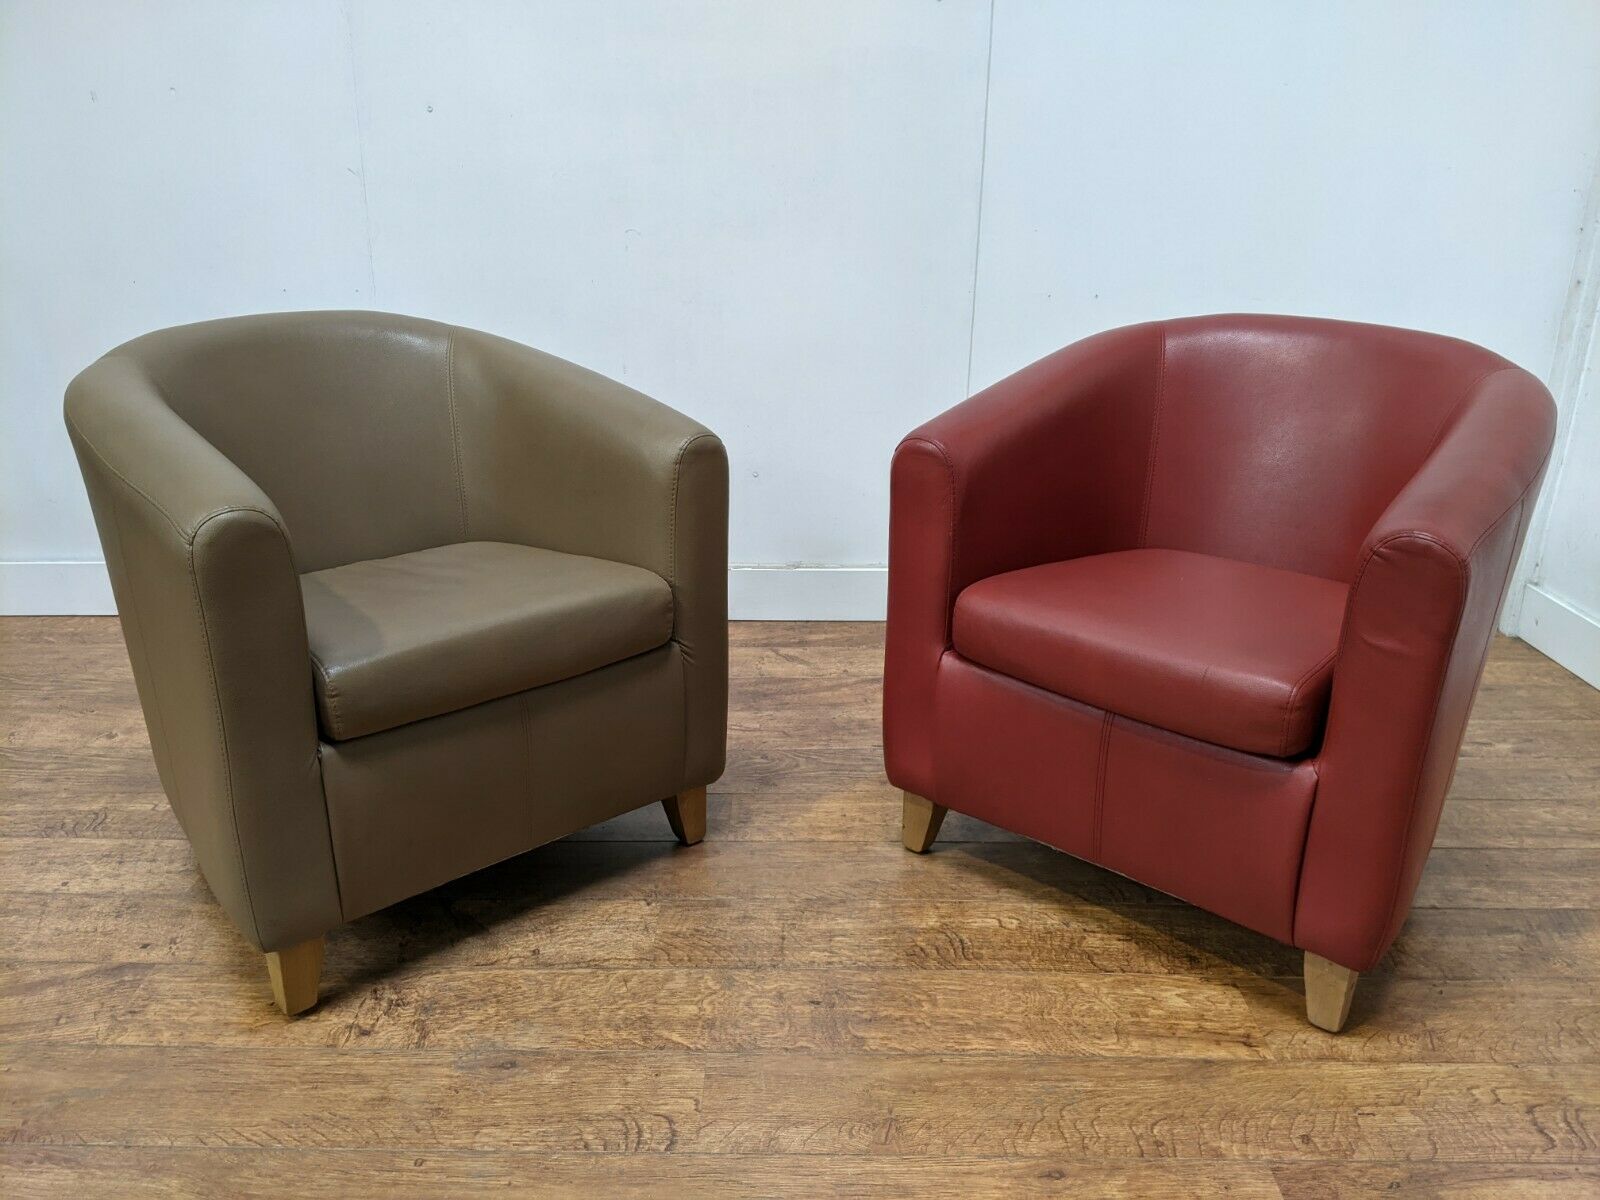 30x fabulous andy thornton red and taupe leather tub chairs   nottinghamshire